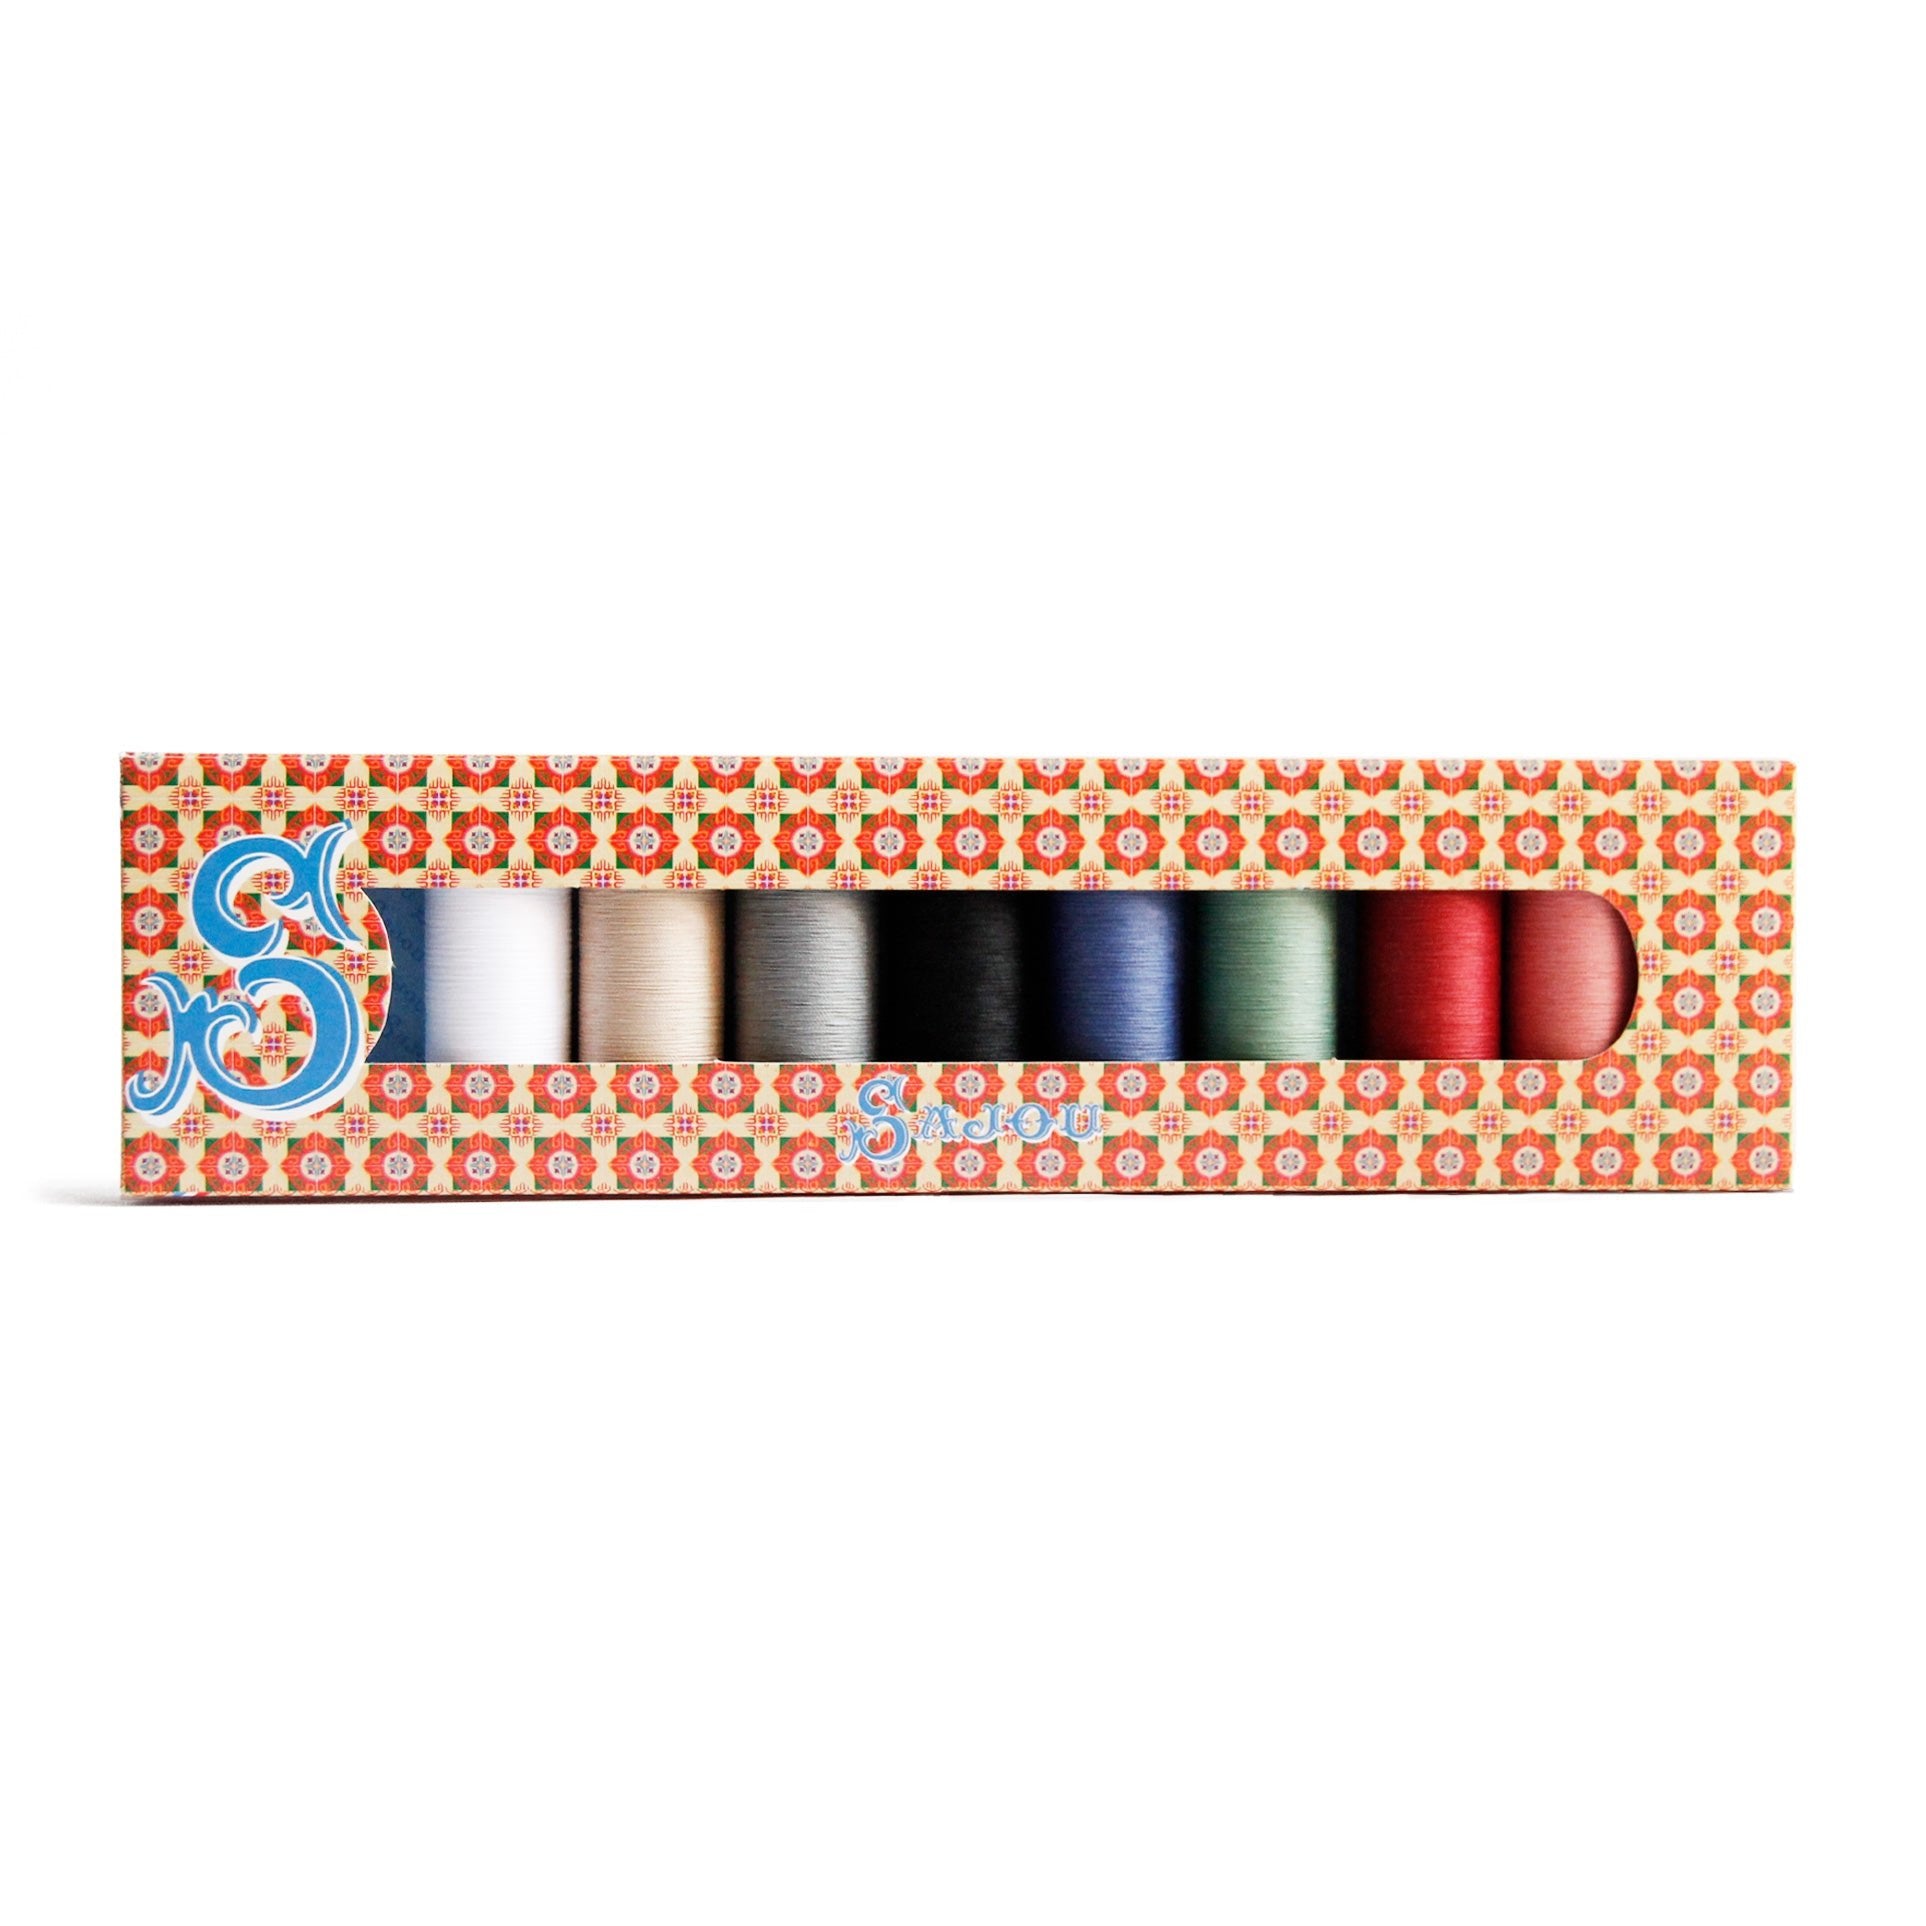 Patchwork Thread Gift Box, 8 spools    at Boston General Store